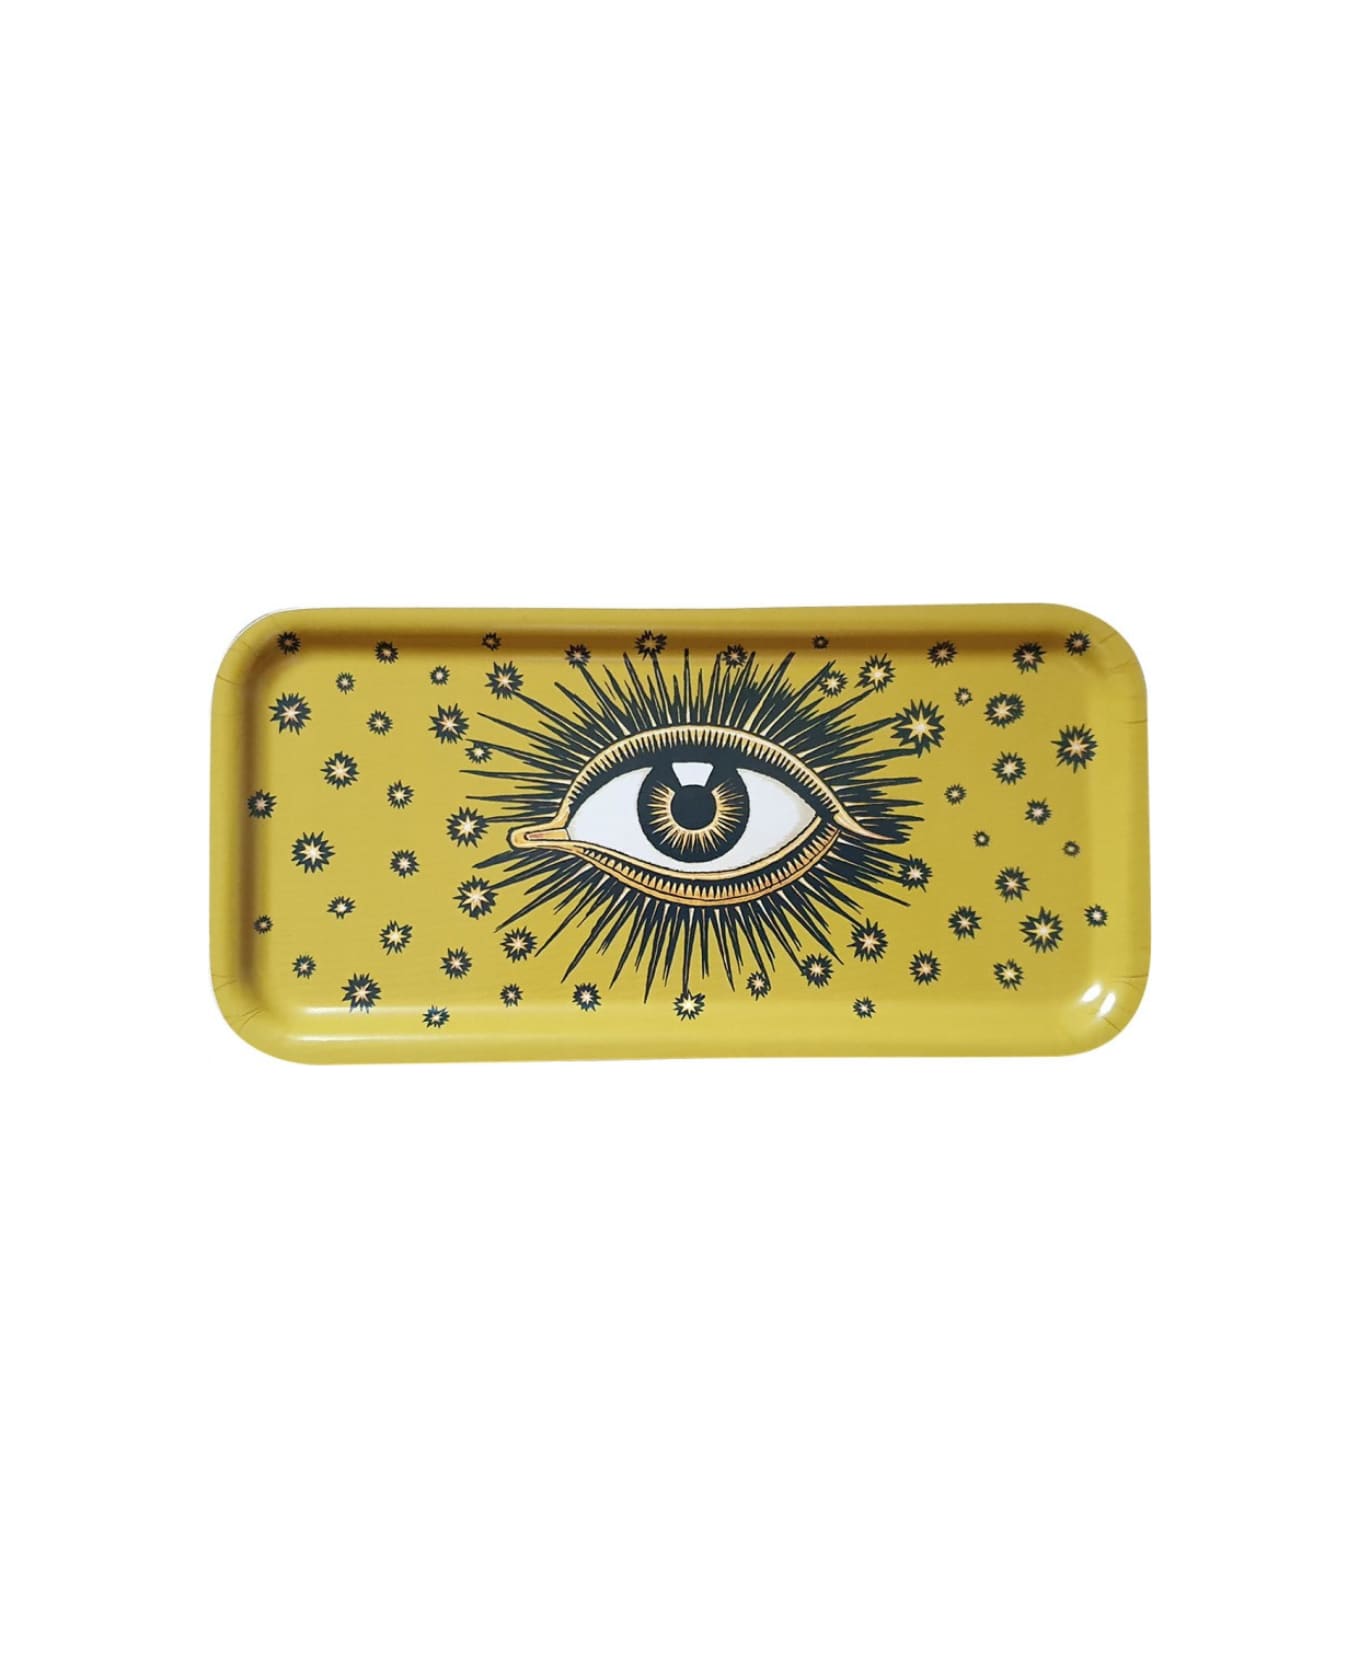 Les-Ottomans Eyes Yellow Wood Tray Les-ottomans Home - Yellow トレー